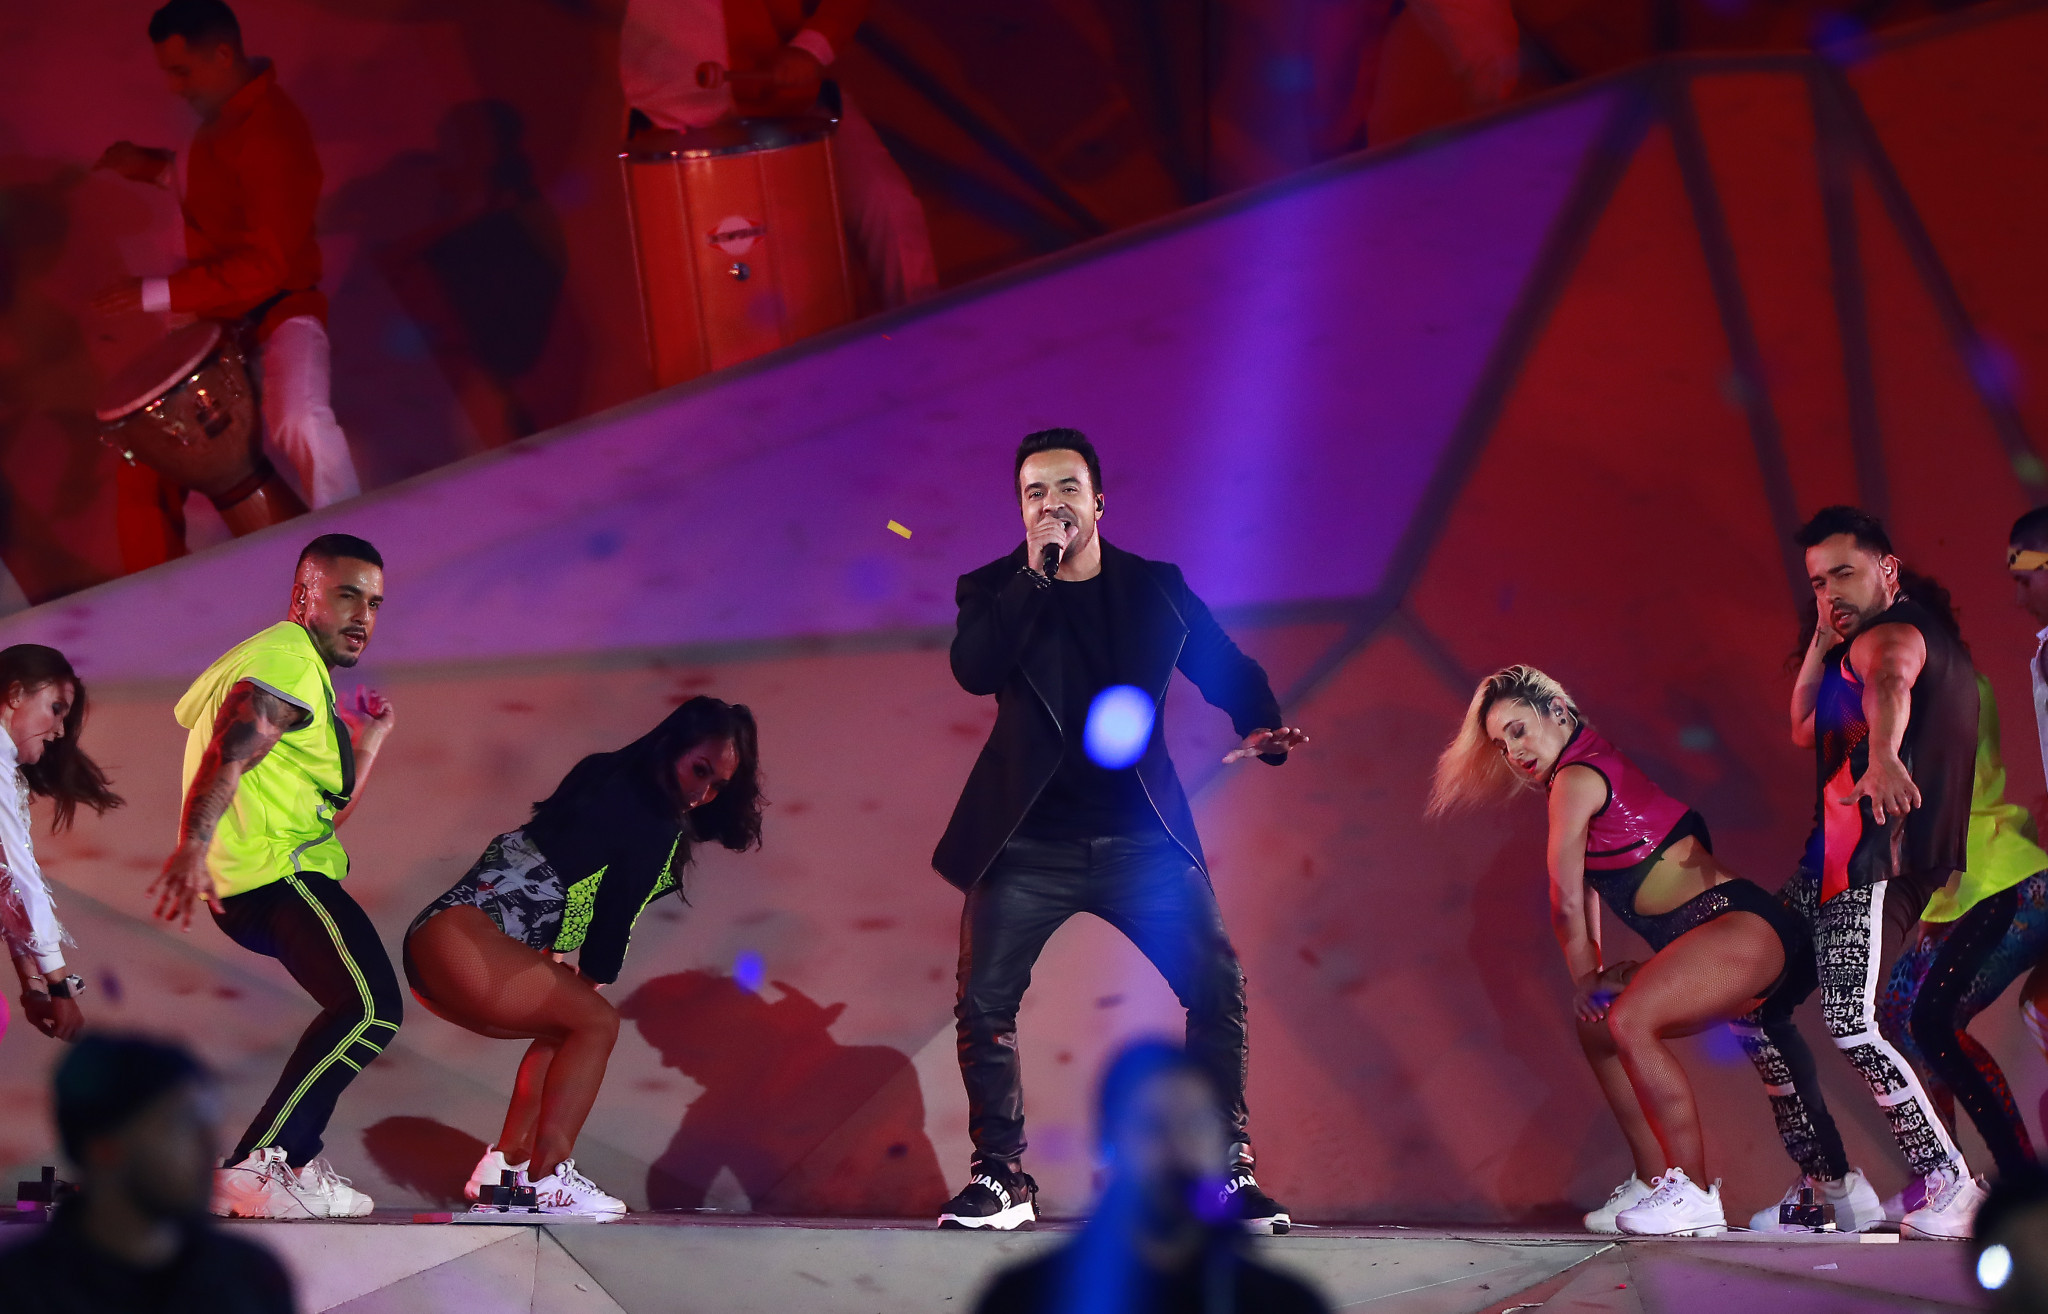 Luis Fonsi was the headline act and performed his hit Despacito ©Lima 2019